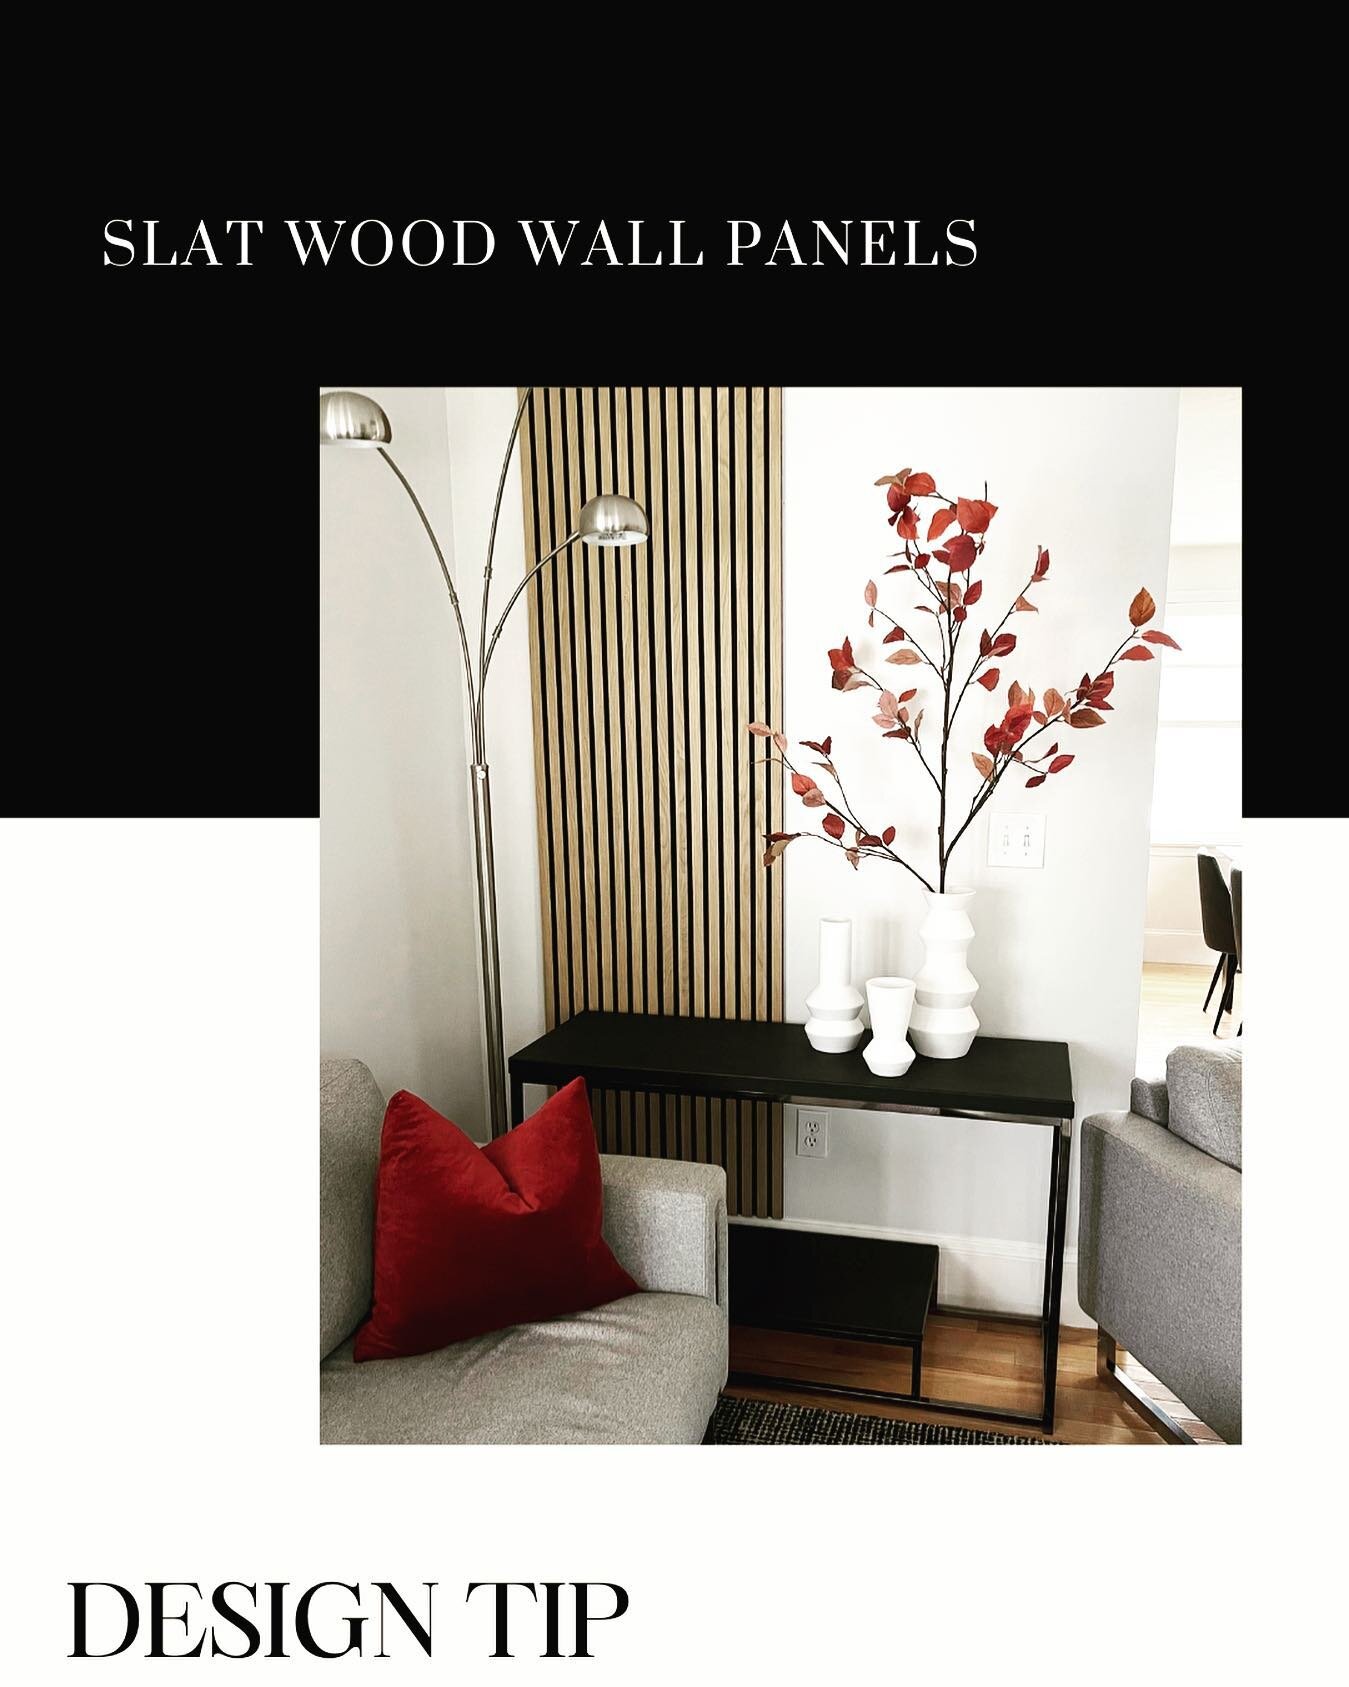 Installing slat wood panels is an easy update to enhance the look of any home. It adds warm tones, texture and visual height without taking much space. One of my favorite styling options lately. It always comes out great! 

#slatwoodwall #slatwoodpan